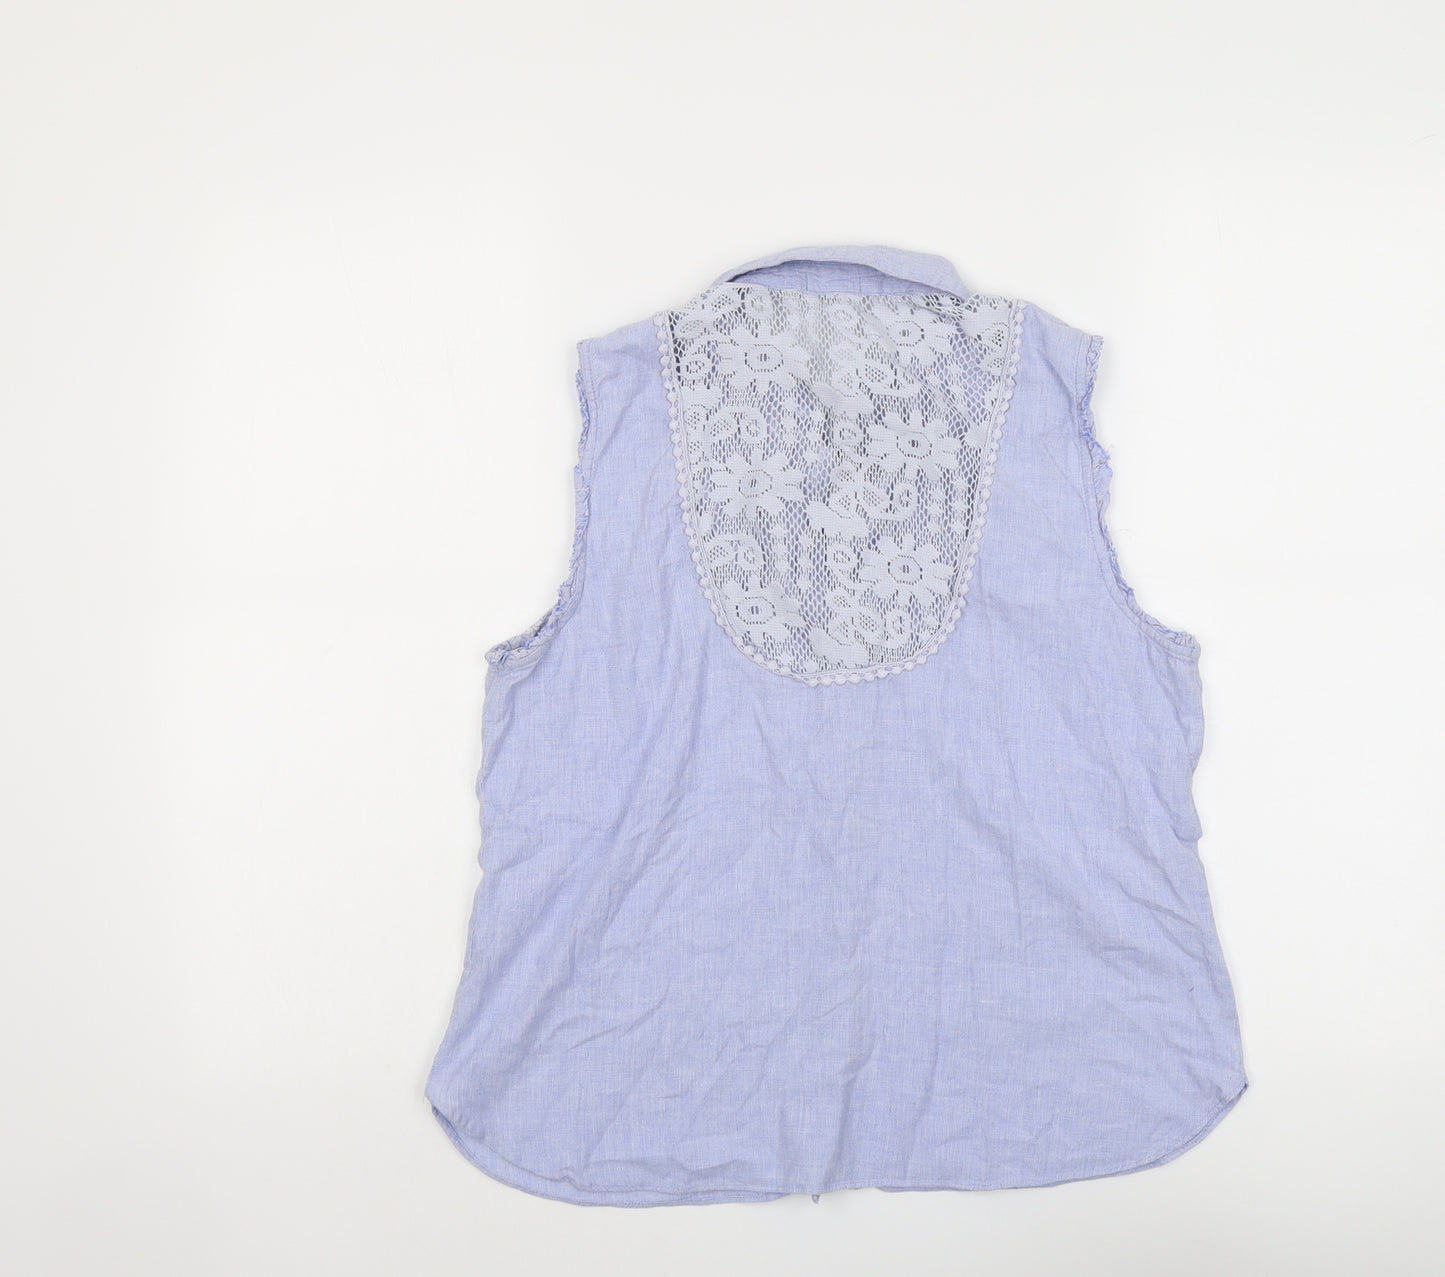 River Island Womens Blue Polyester Basic Tank Size 12 Collared - Lace Details